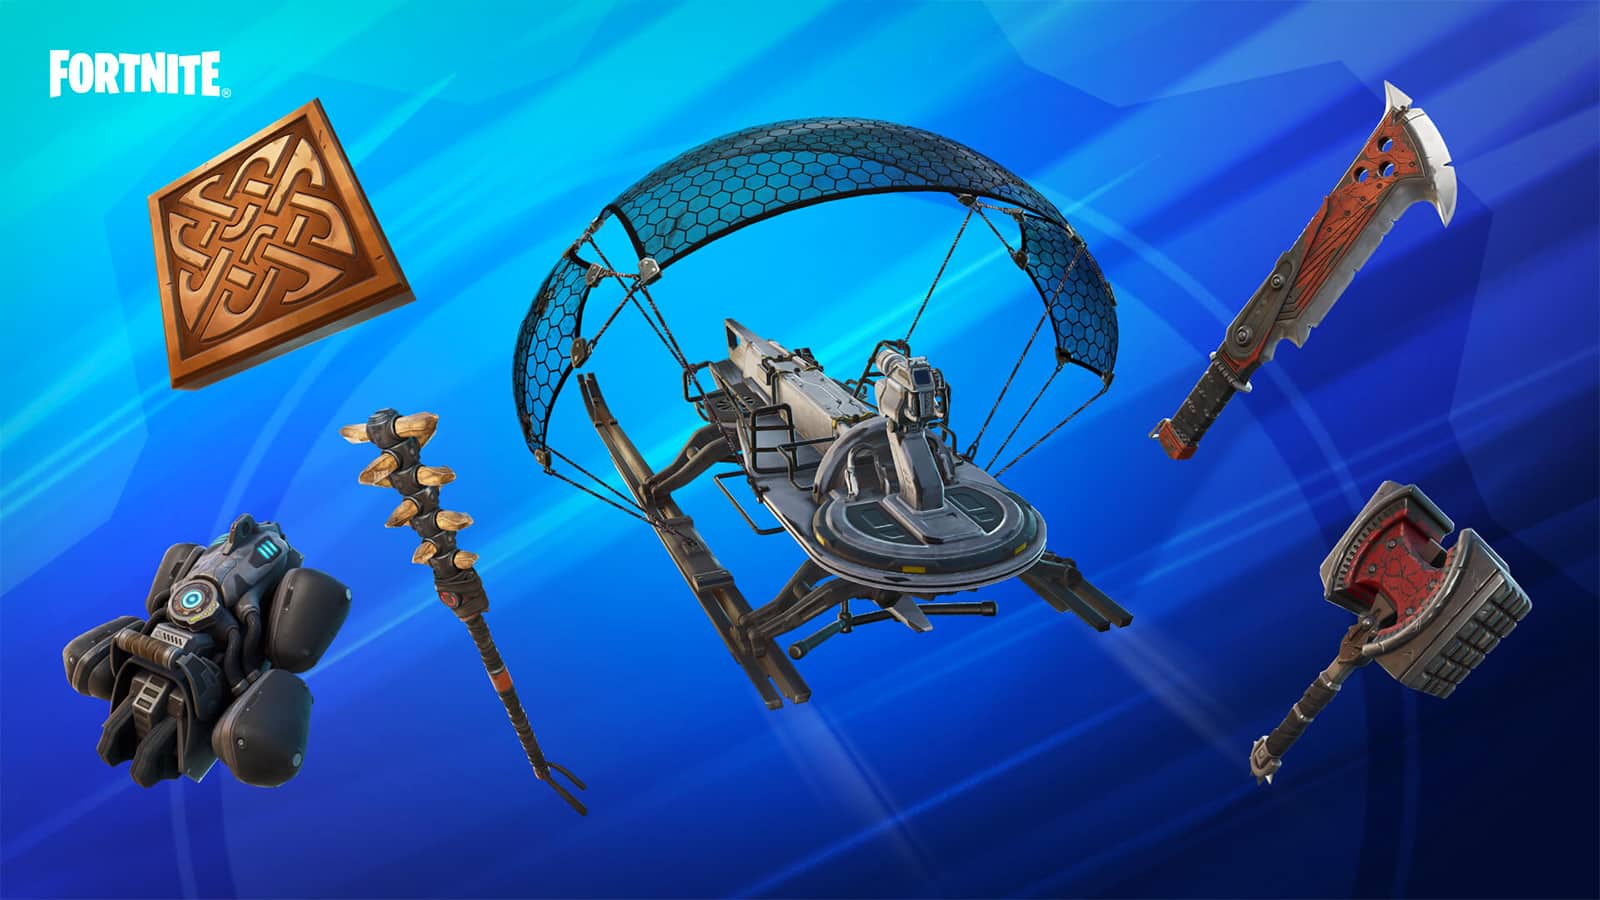 The Gears of War cosmetics in Fortnite